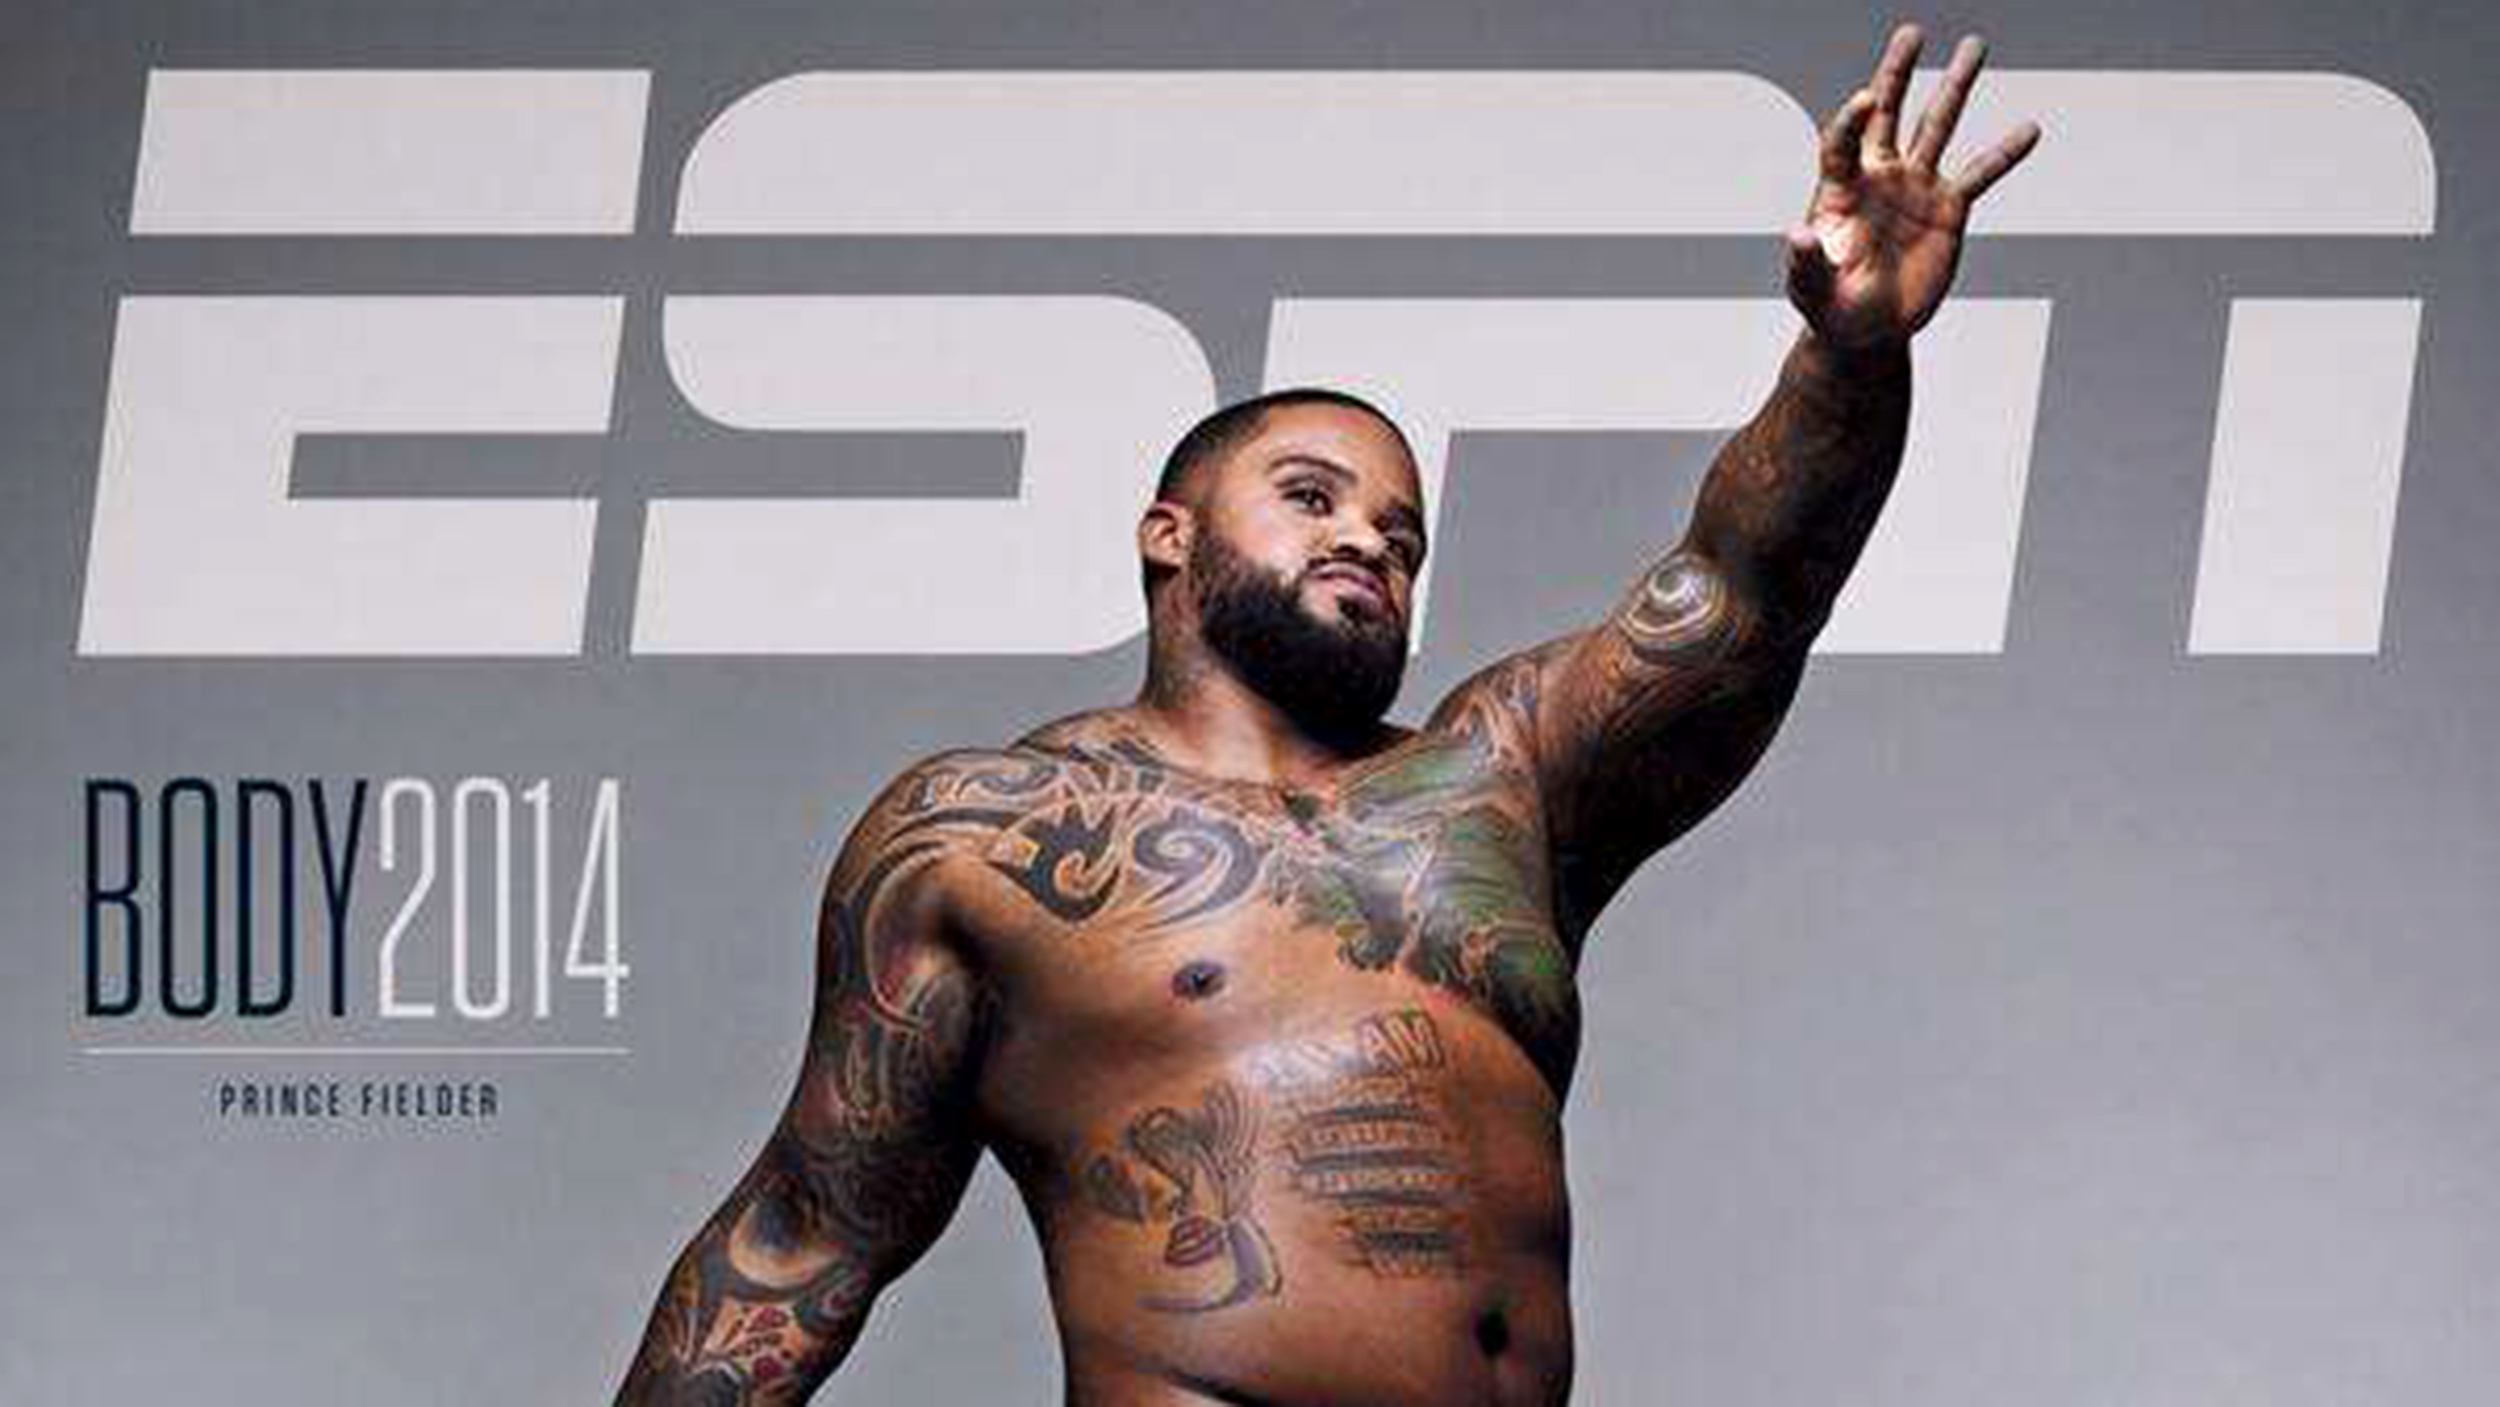 Presenting This Years ESPN Body Issue Covers | 15 Minute News